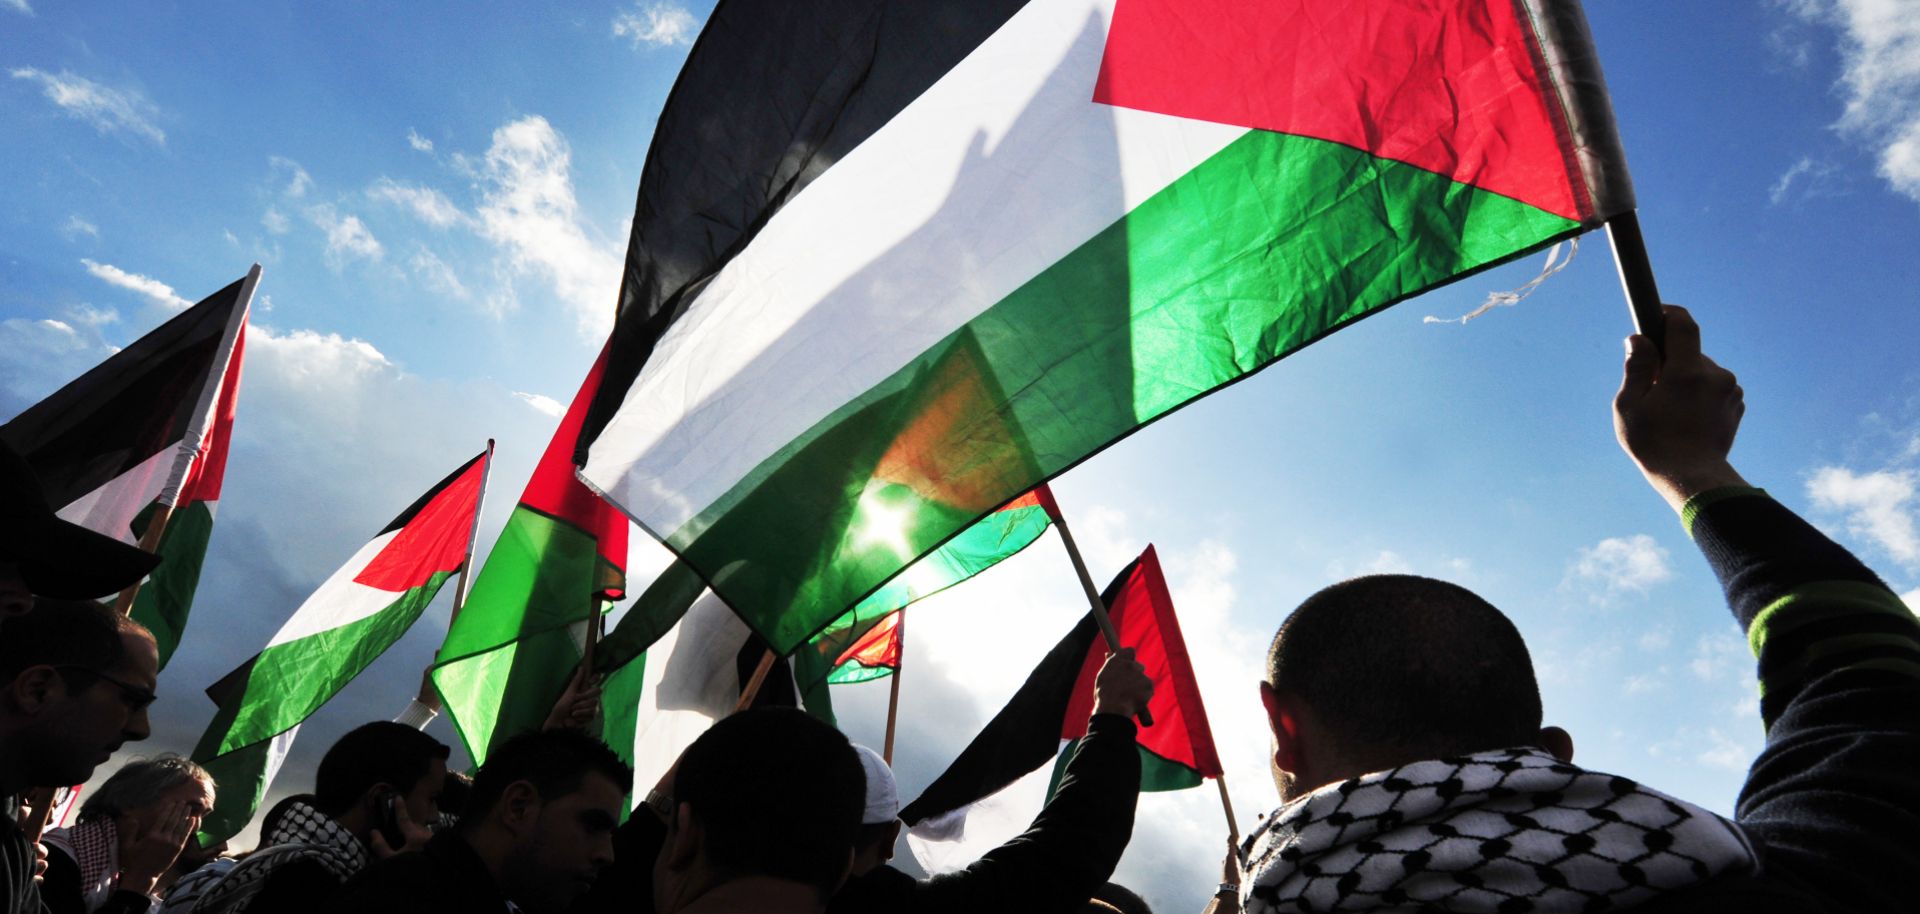 A group of demonstrators wave the Palestinian flag on Dec. 31, 2009.